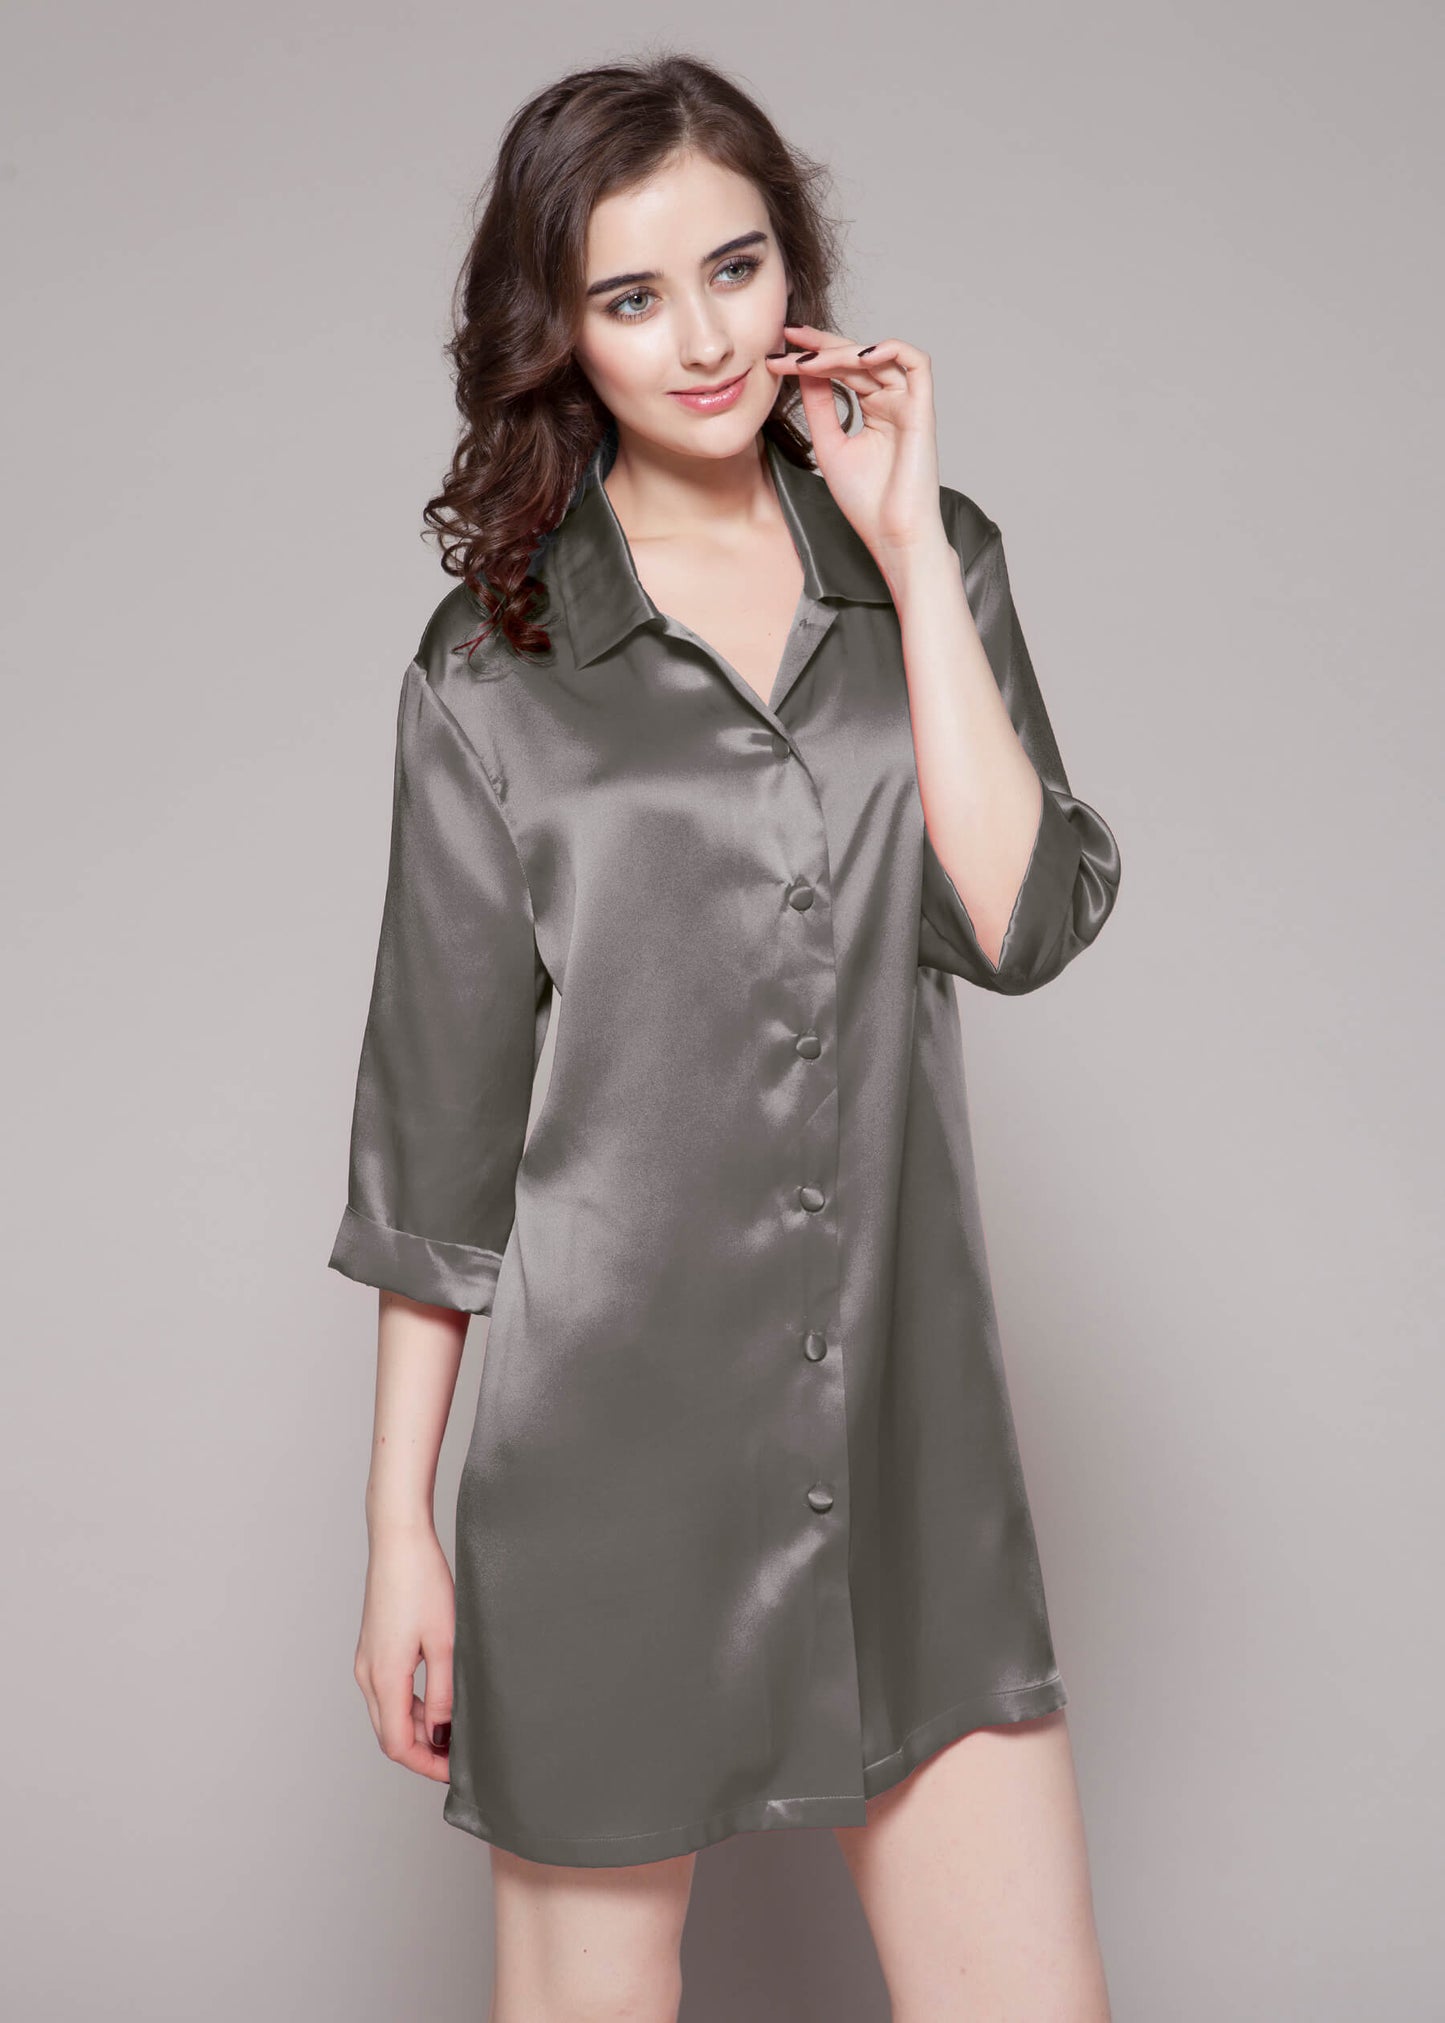 22 Momme Classic Silk Nightshirt Violet